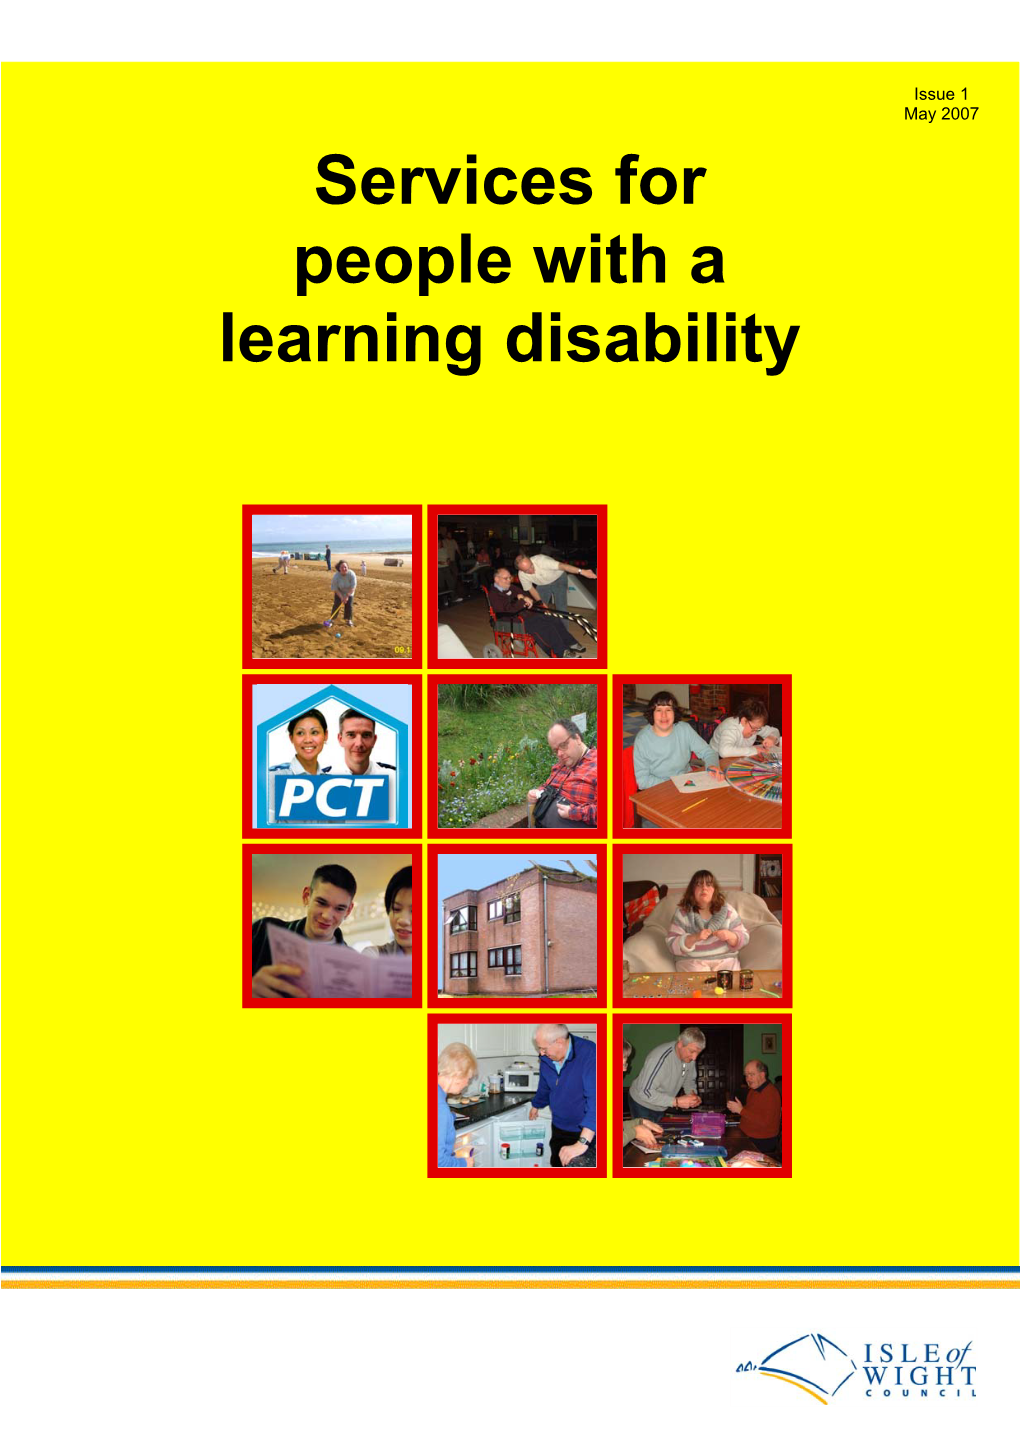 Services for People with a Learning Disability